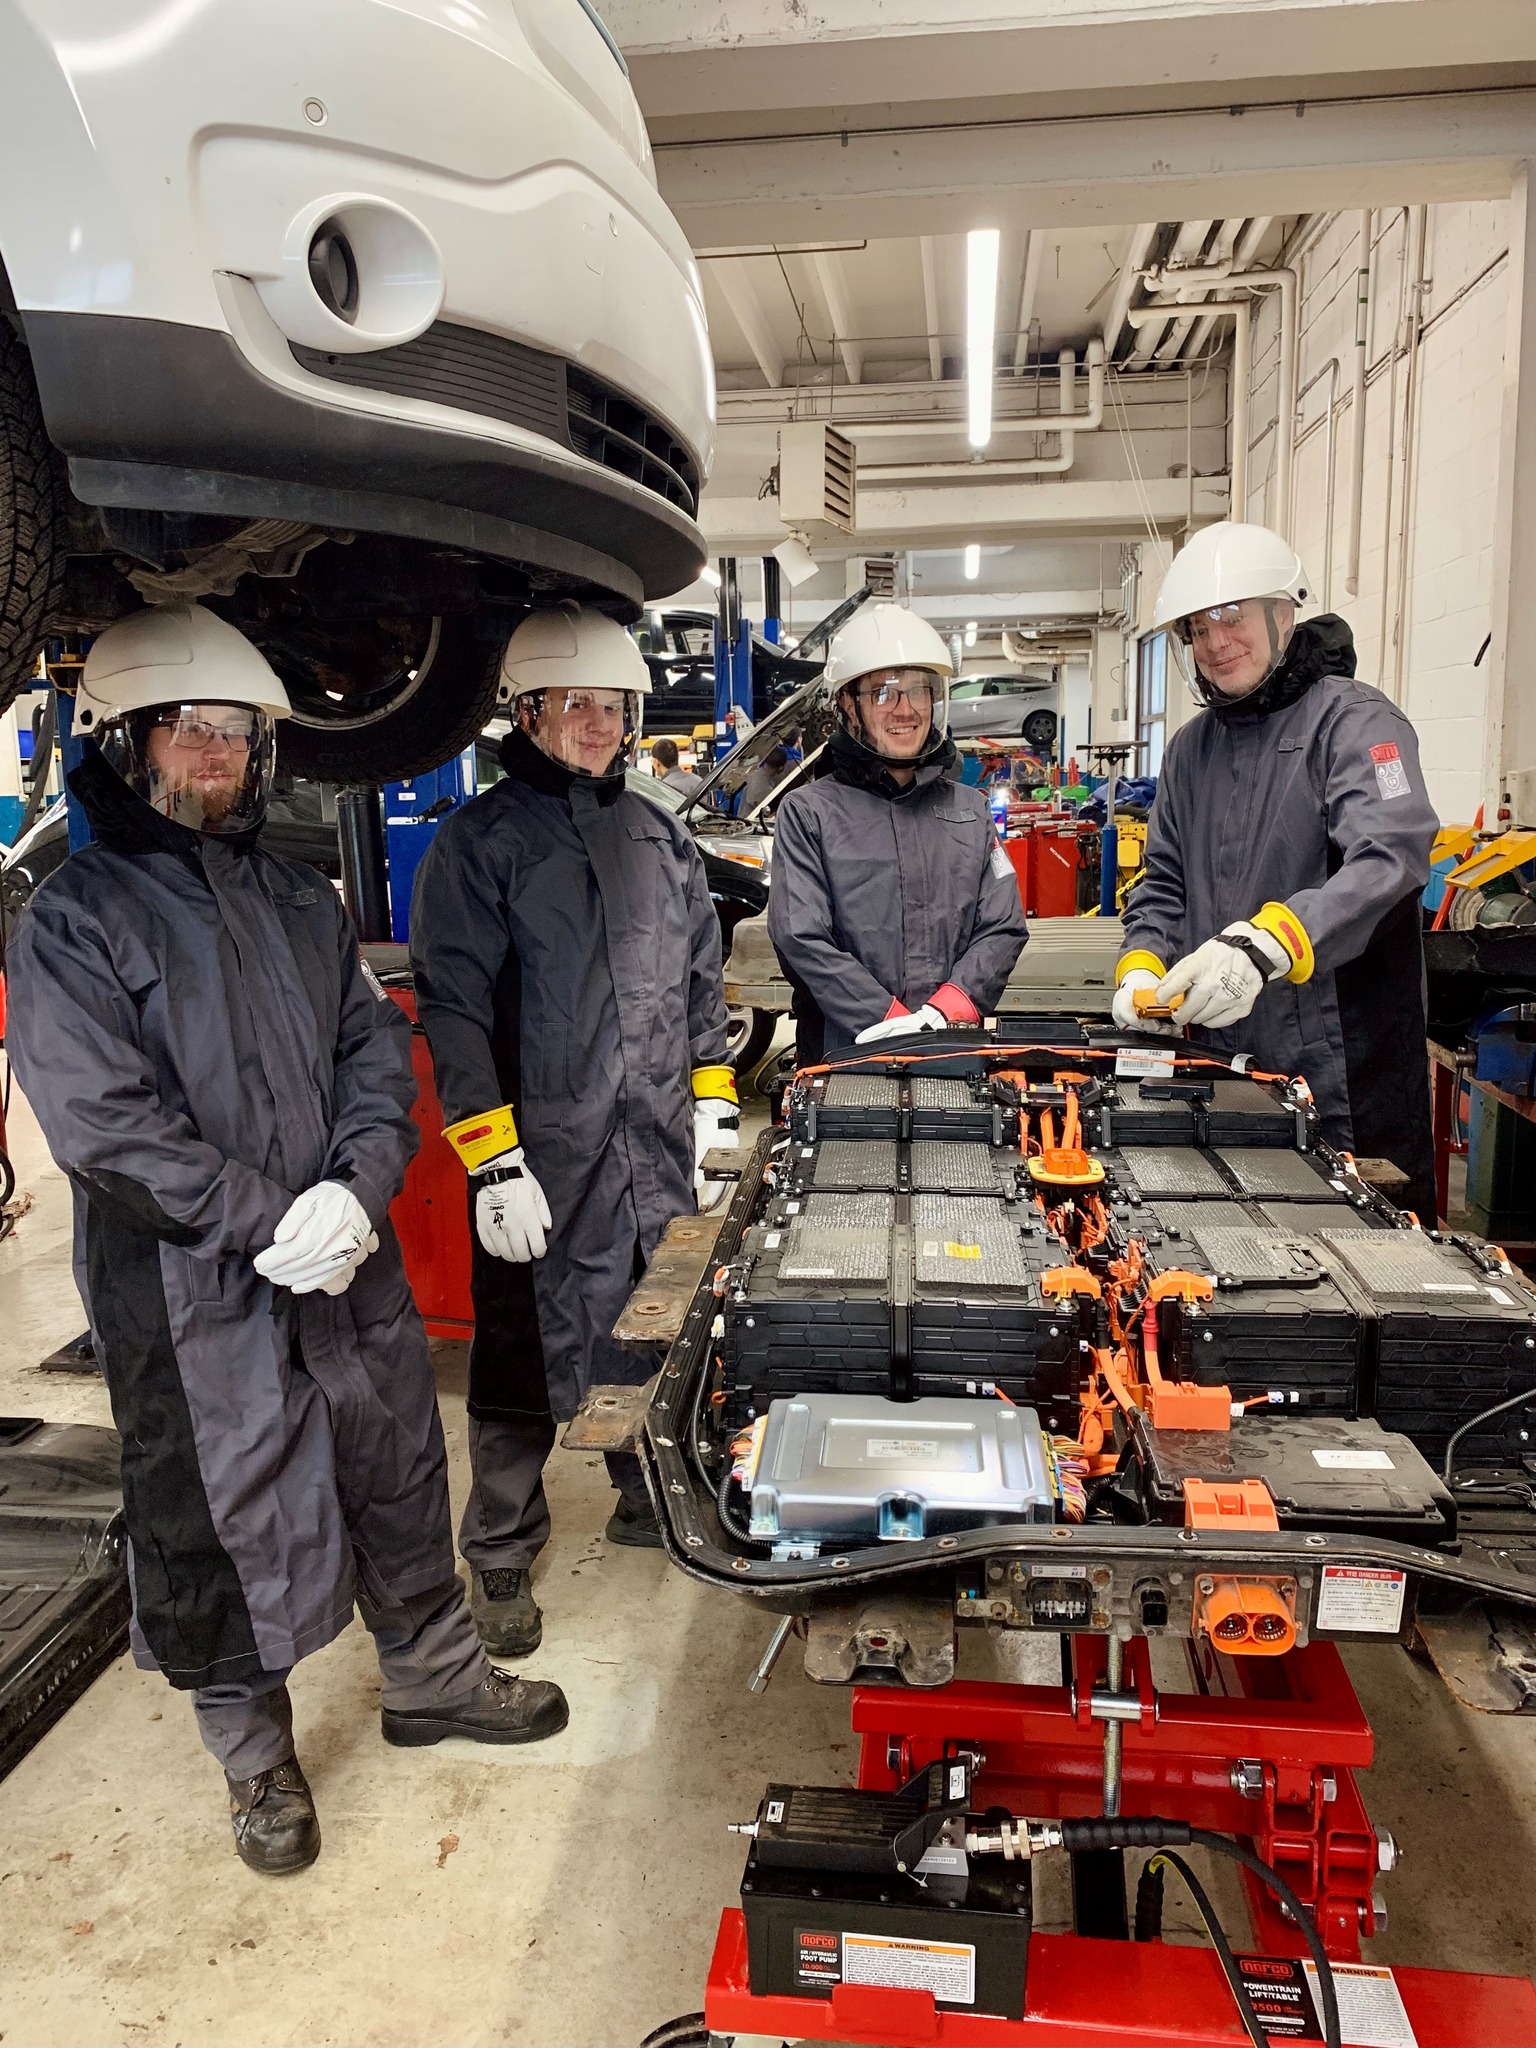 Inspections on Electric Vehicle traction batteries